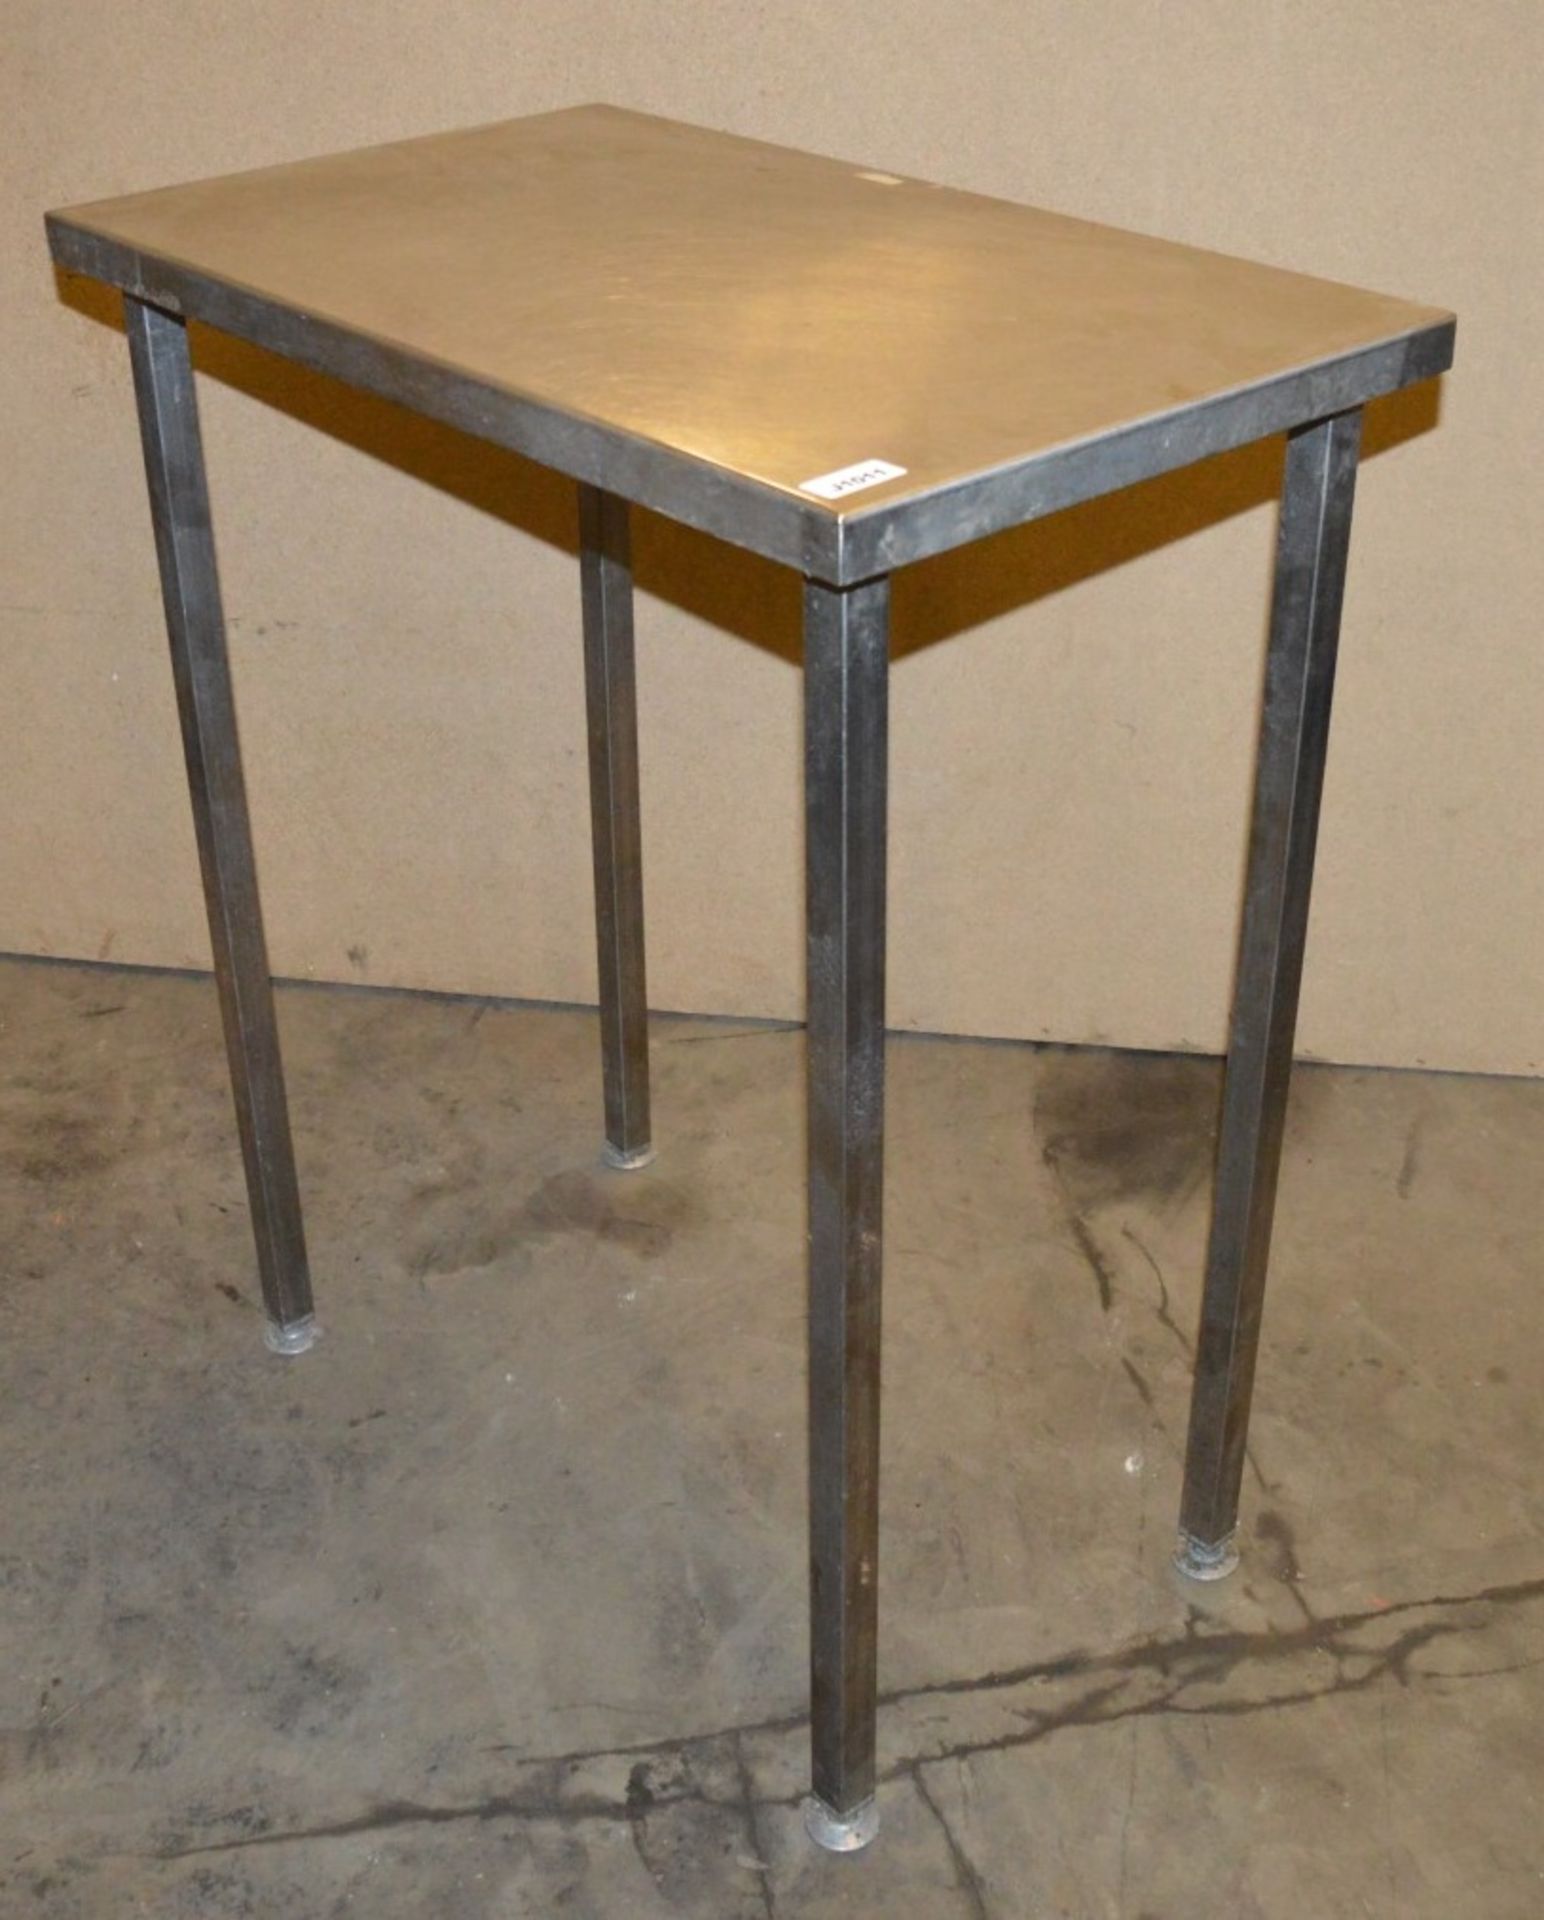 1 x Stainless Steel Prep Table - Small Size - CL282 - Ref J1011 - Location: Bolton BL1Thursday